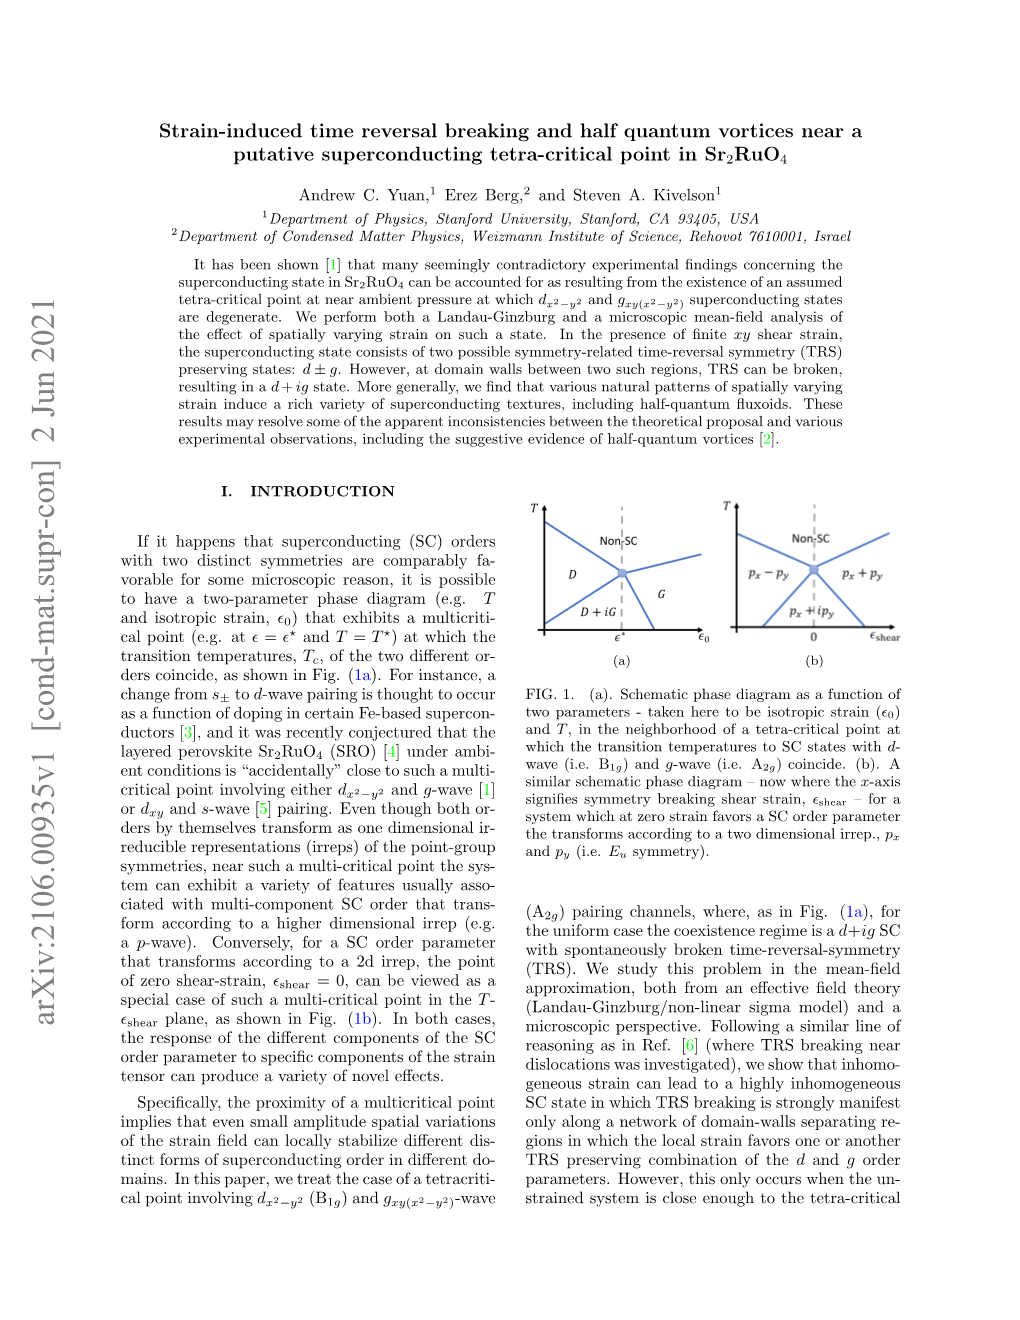 Strain-Induced Time Reversal Breaking and Half Quantum Vortices Near a Putative Superconducting Tetra-Critical Point in Sr $ 2 $ Ruo $